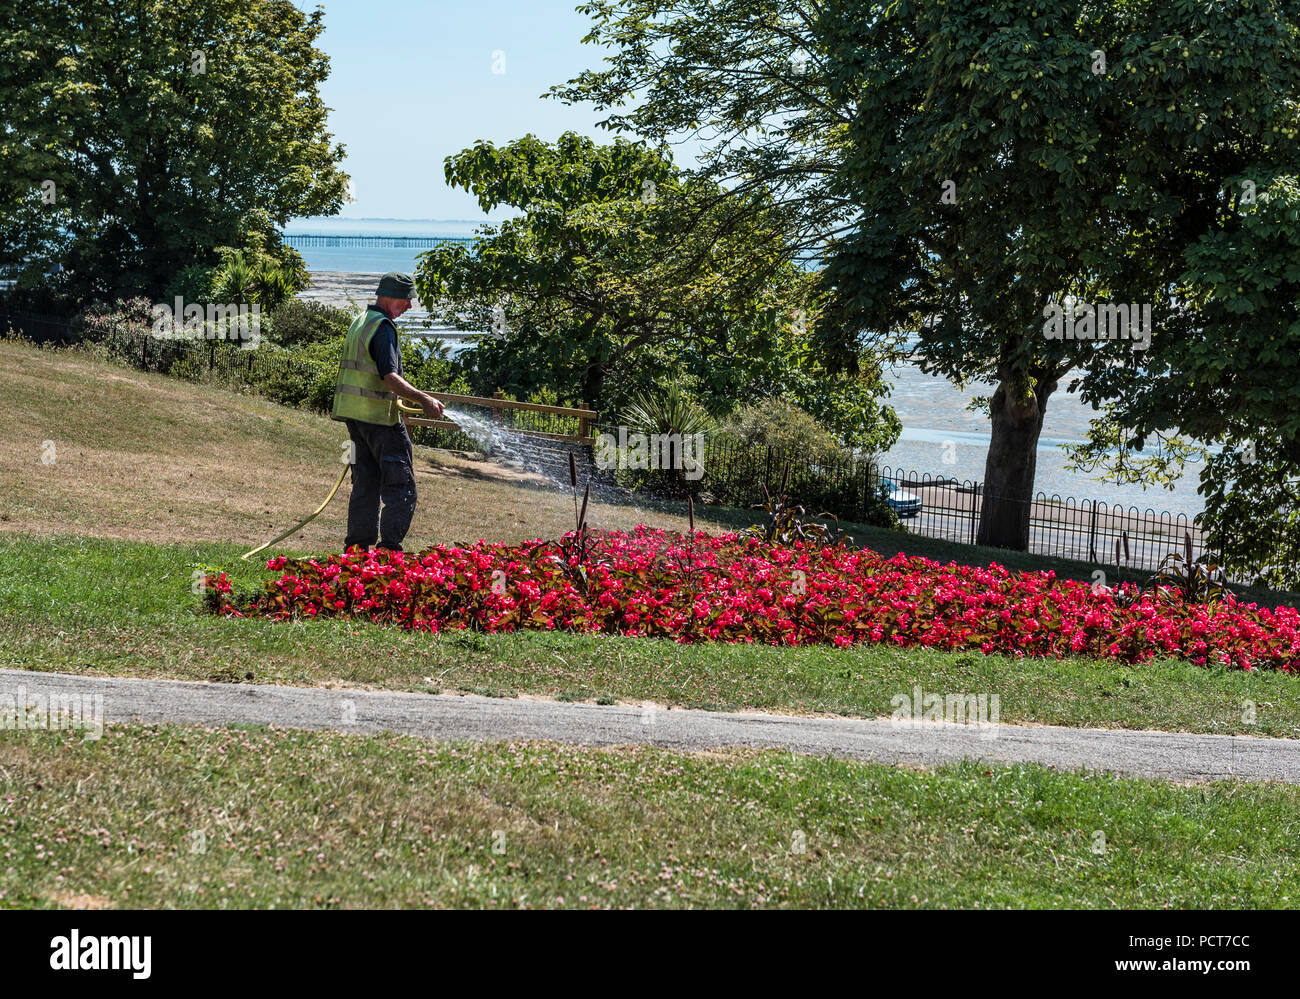 Minicipal flowerbeds being watered by a council employee.Irrigating public flower gardens, during drought conditions. Stock Photo